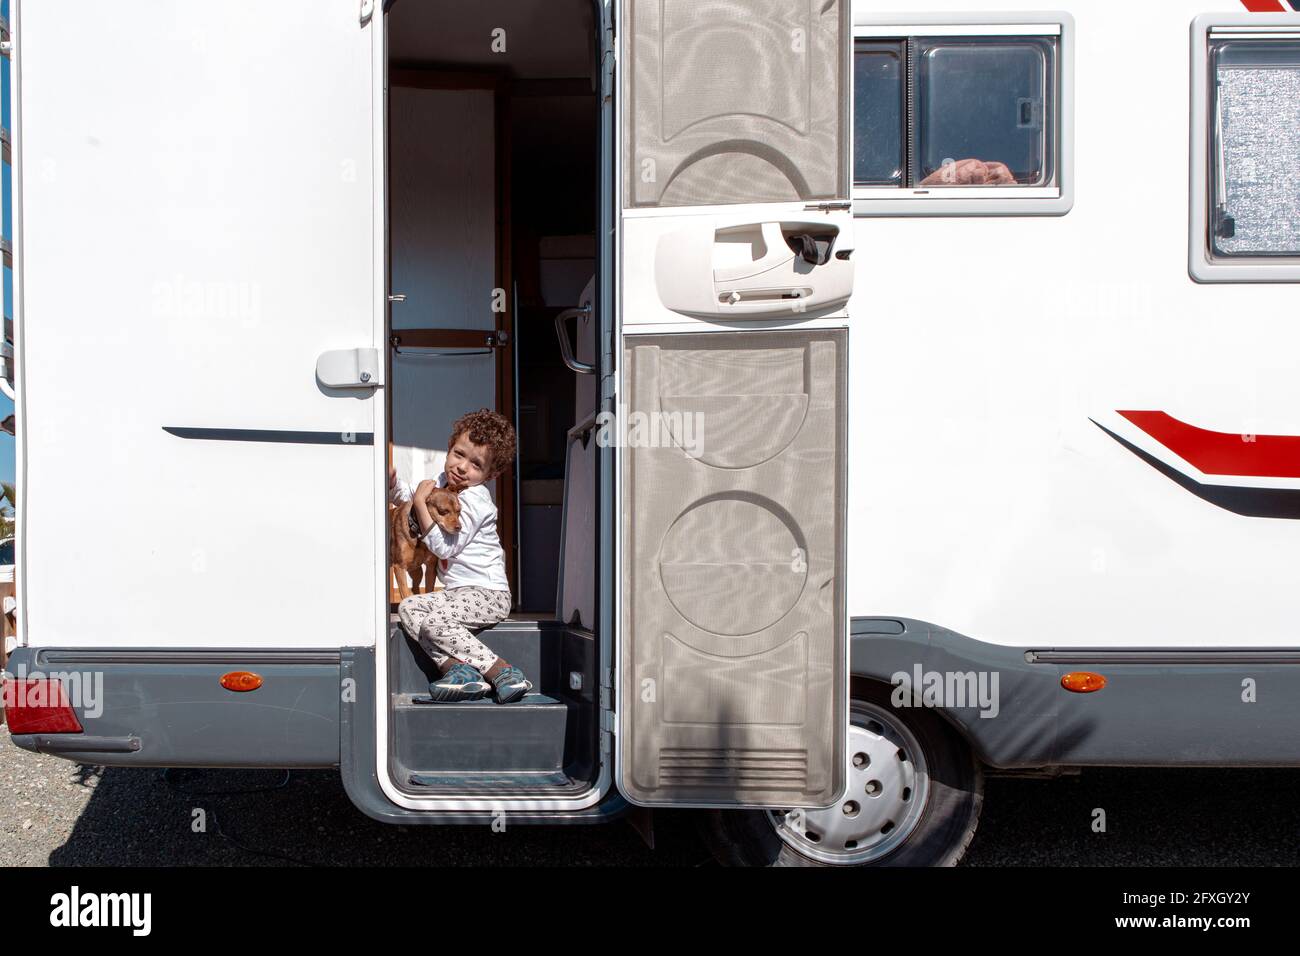 little curly-haired boy smiling sitting in the door of motor home, tenderly holding his pet. Stock Photo